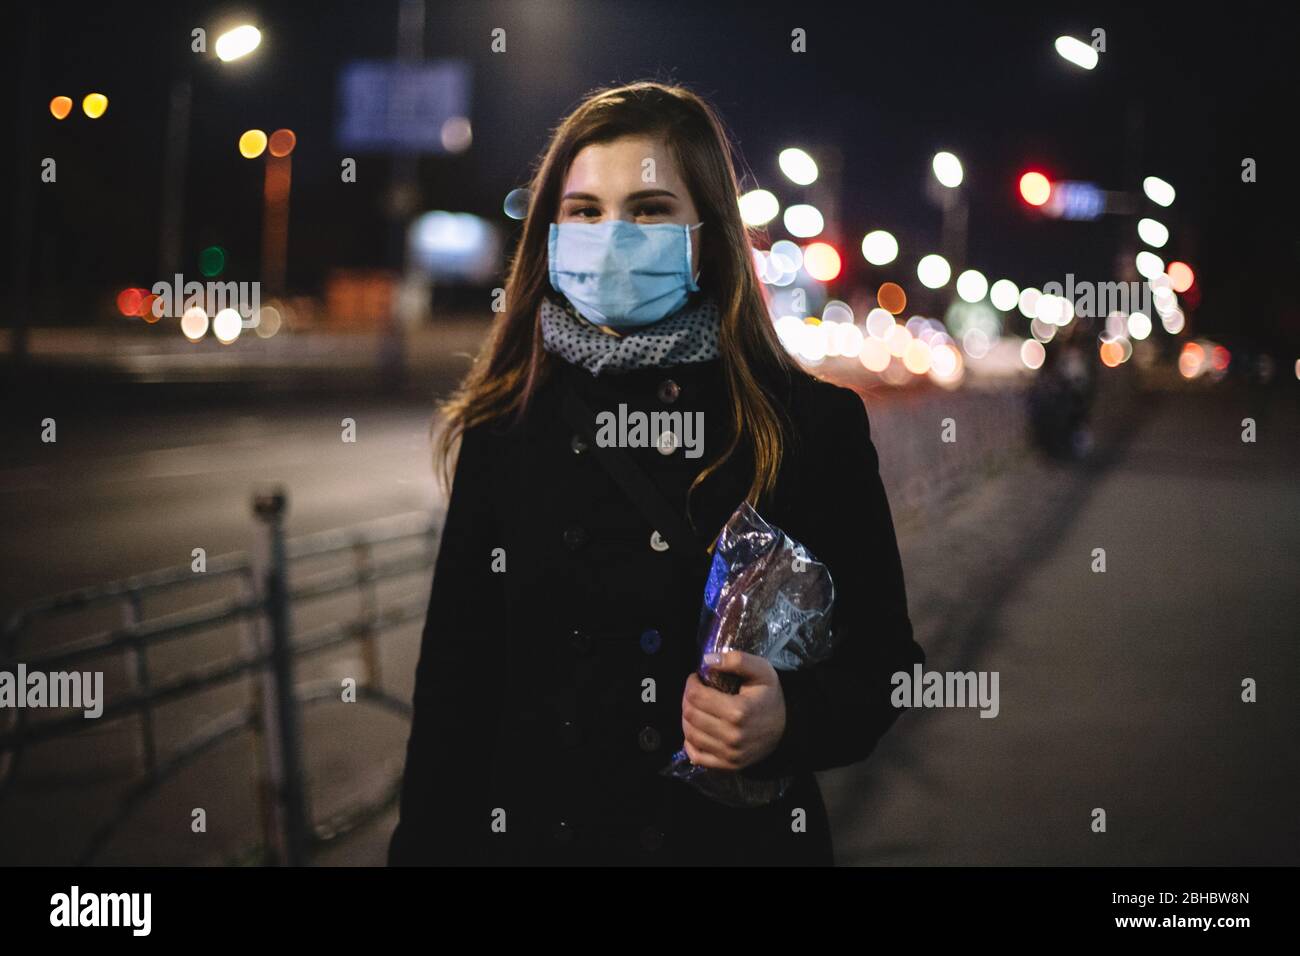 Portrait of young happy woman wearing face medical mask carrying bread while walking on city street at night Stock Photo